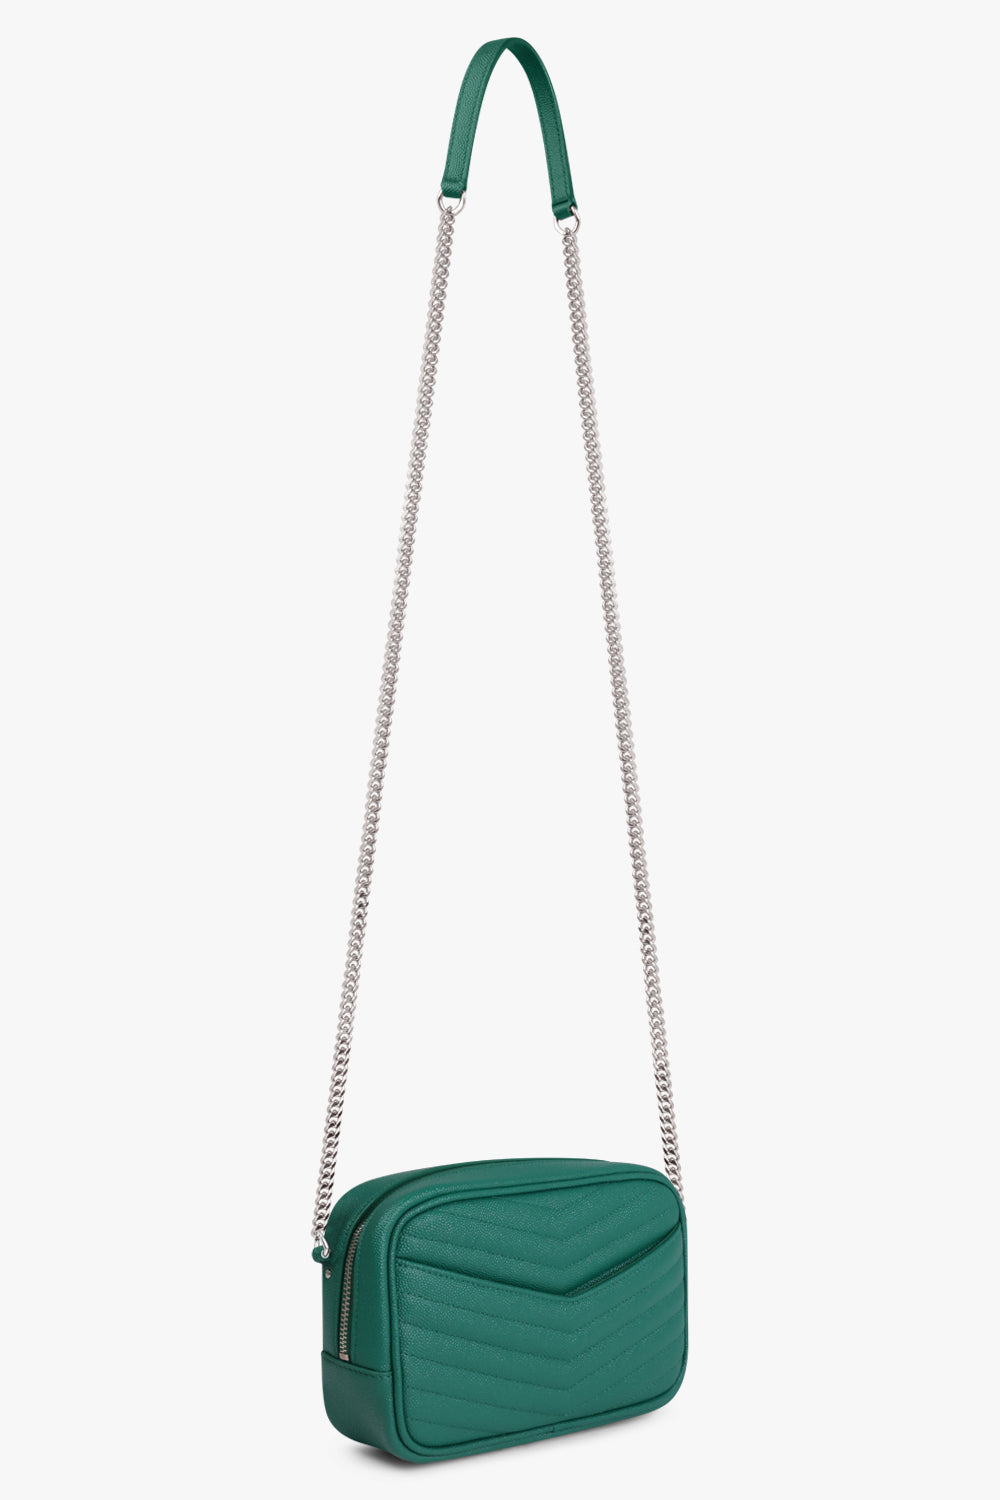 SAINT LAURENT BAGS MULTI LOU MINI QUILTED CAMERA BAG | GREEN FIELD/SILVER